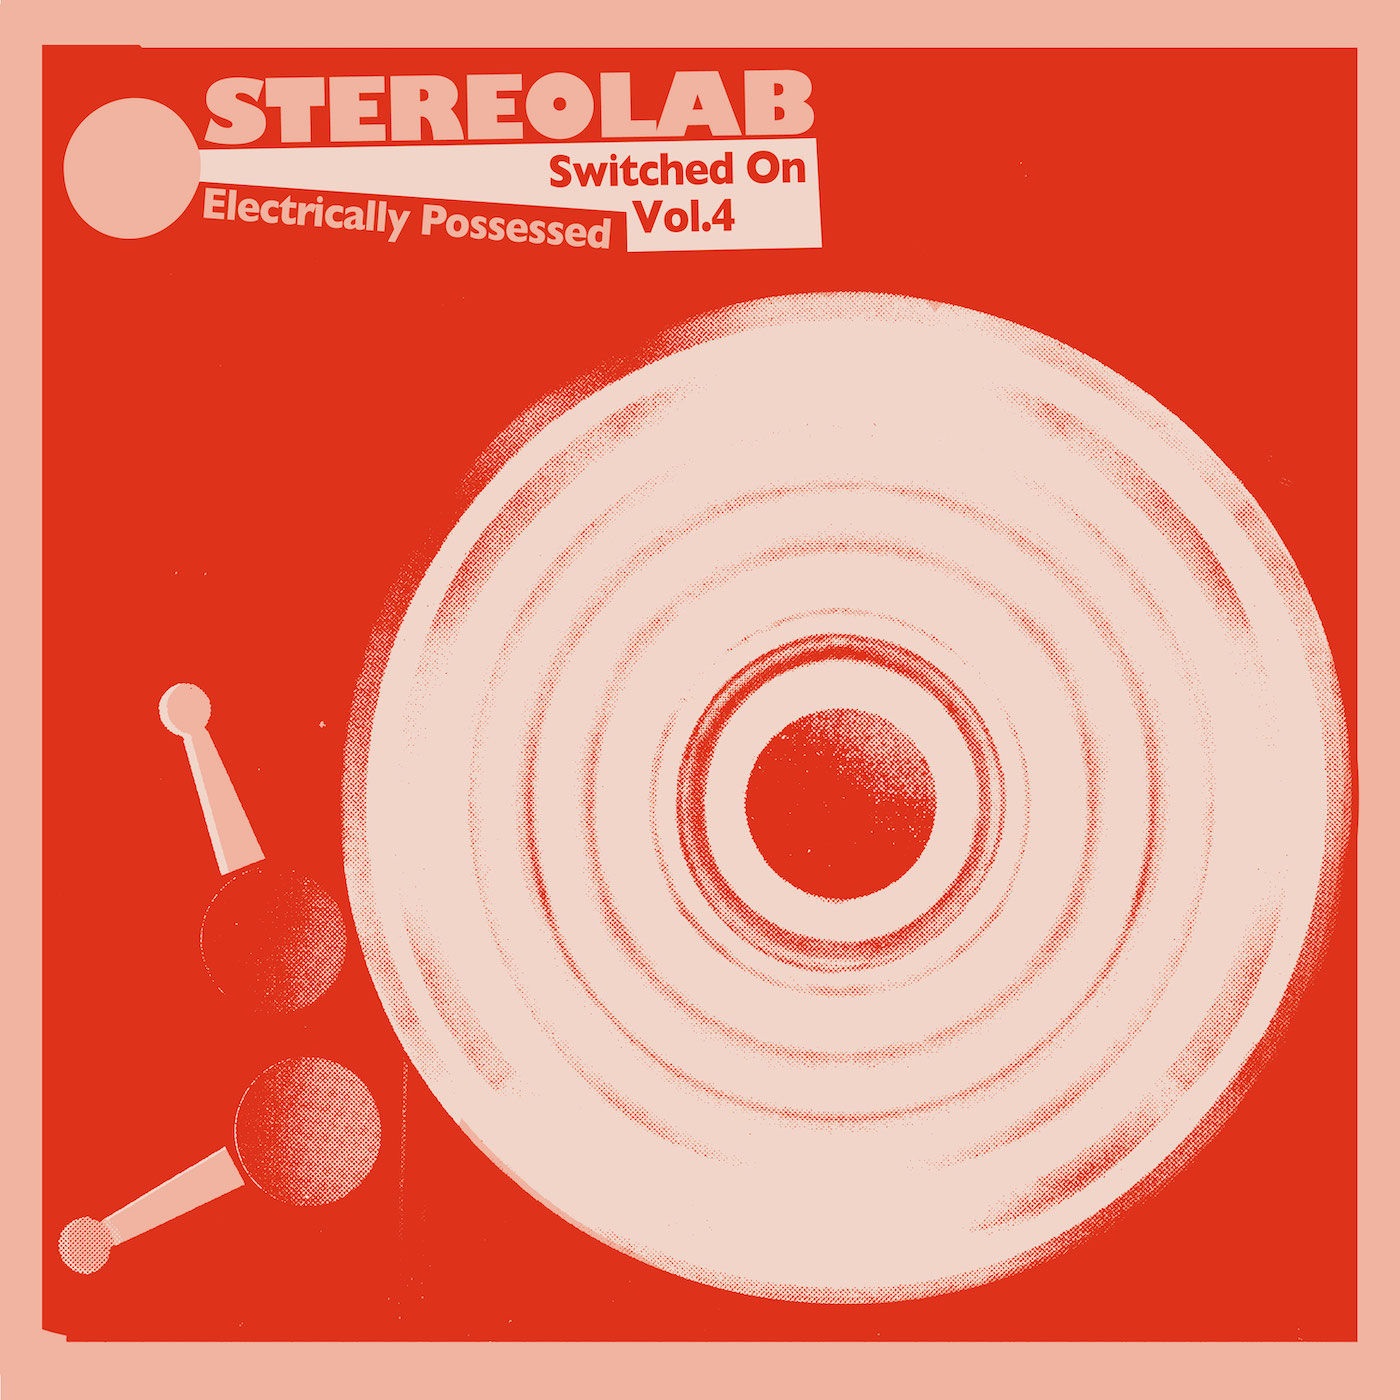 Stereolab – Electrically Possessed (Switched On, Vol. 4) (2021) [FLAC 24bit/96kHz]